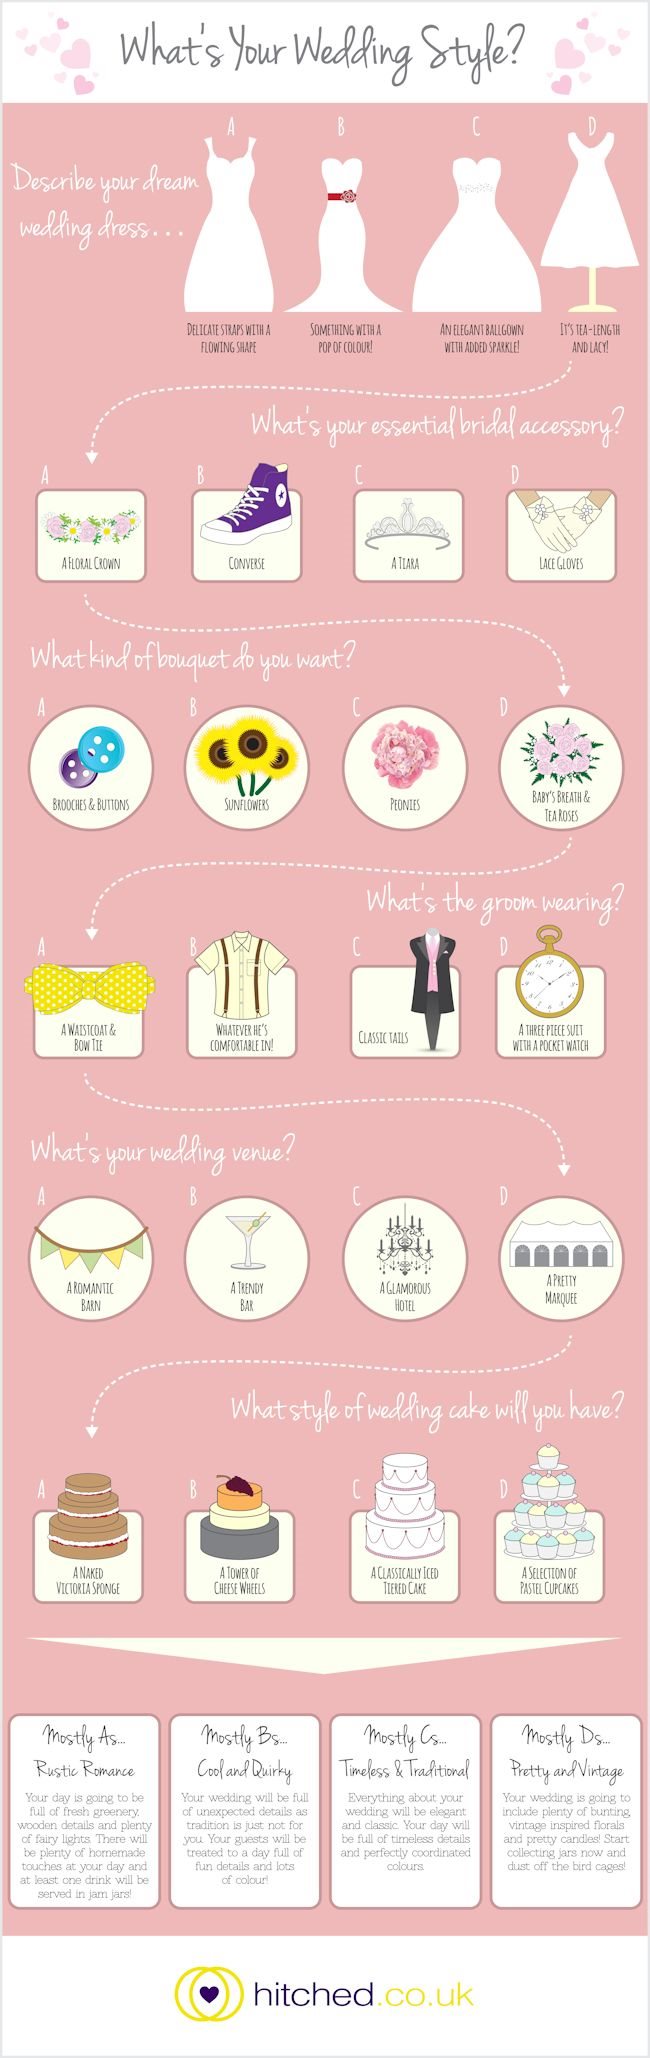 What's Your Wedding Style? by Hitched.co.uk